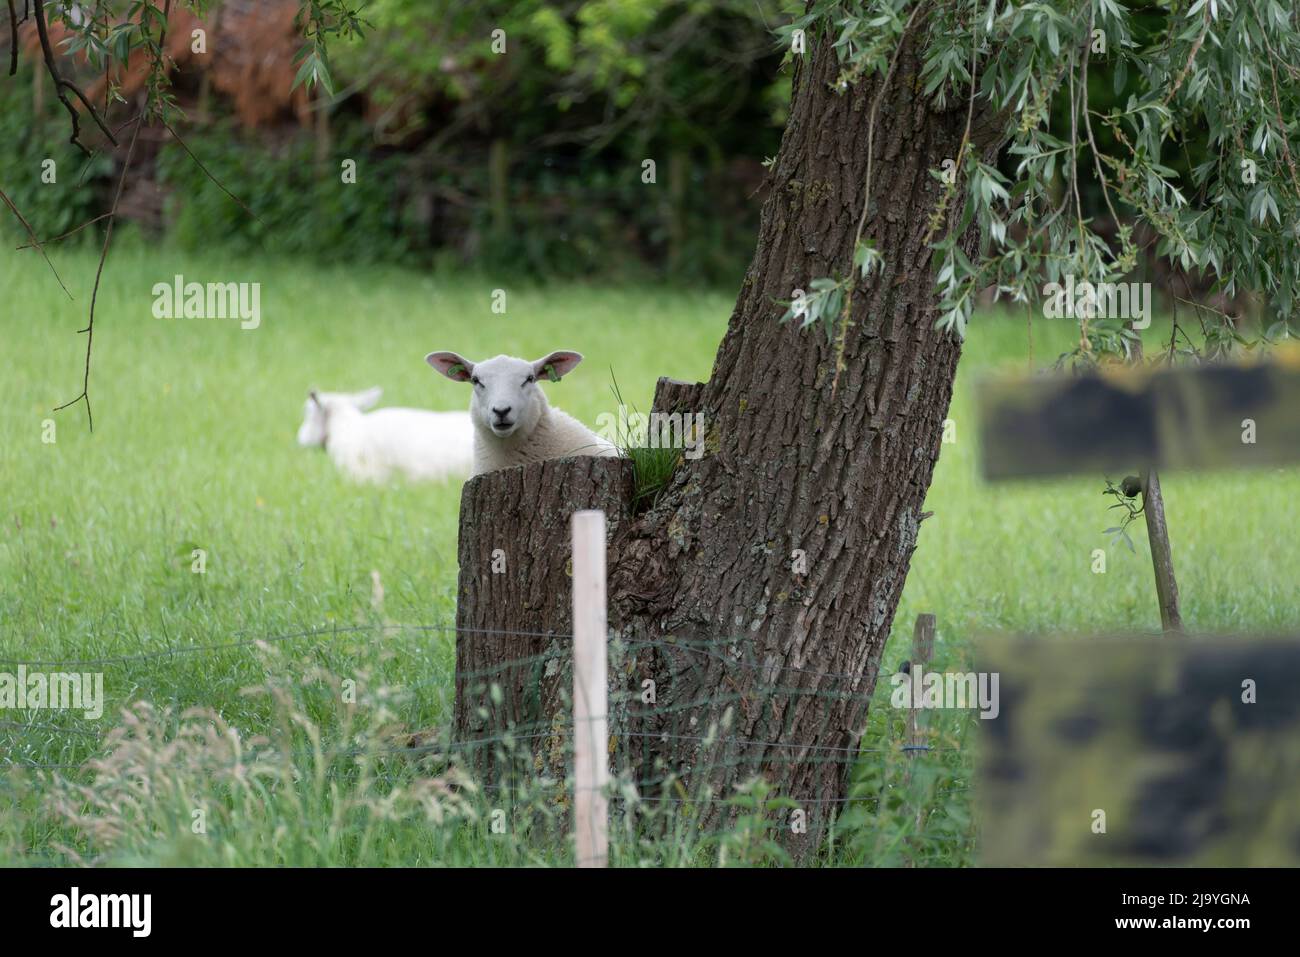 A sheep peers curiously from behind a tree trunk. Stock Photo